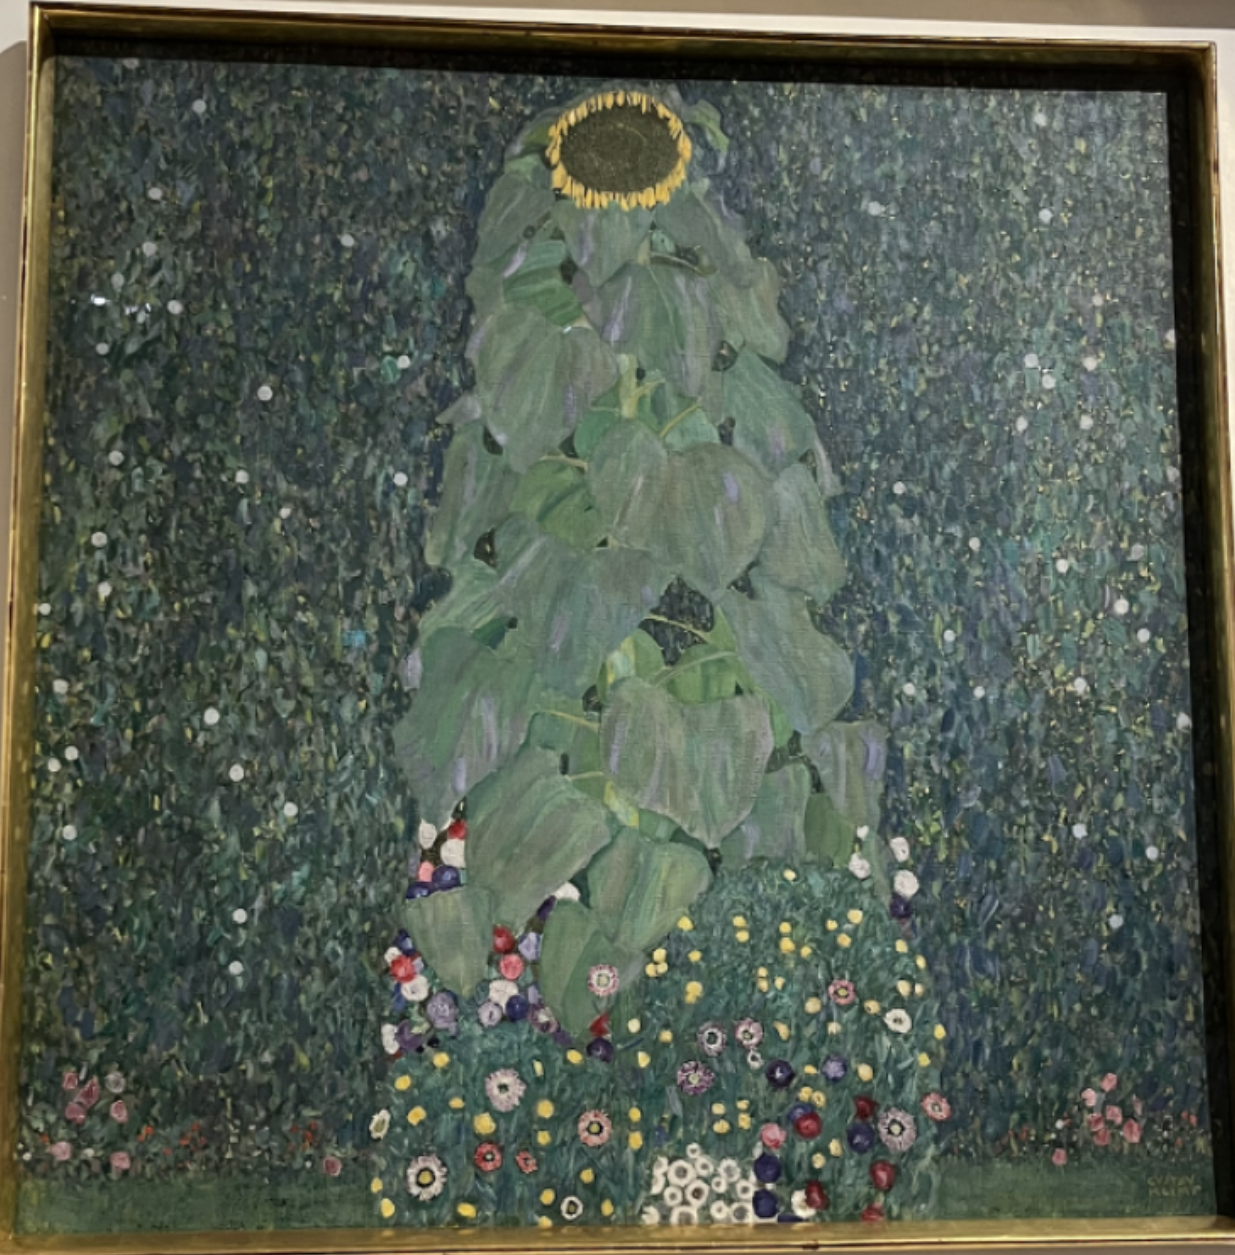 Mystery and answers as to auctioned Klimt painting